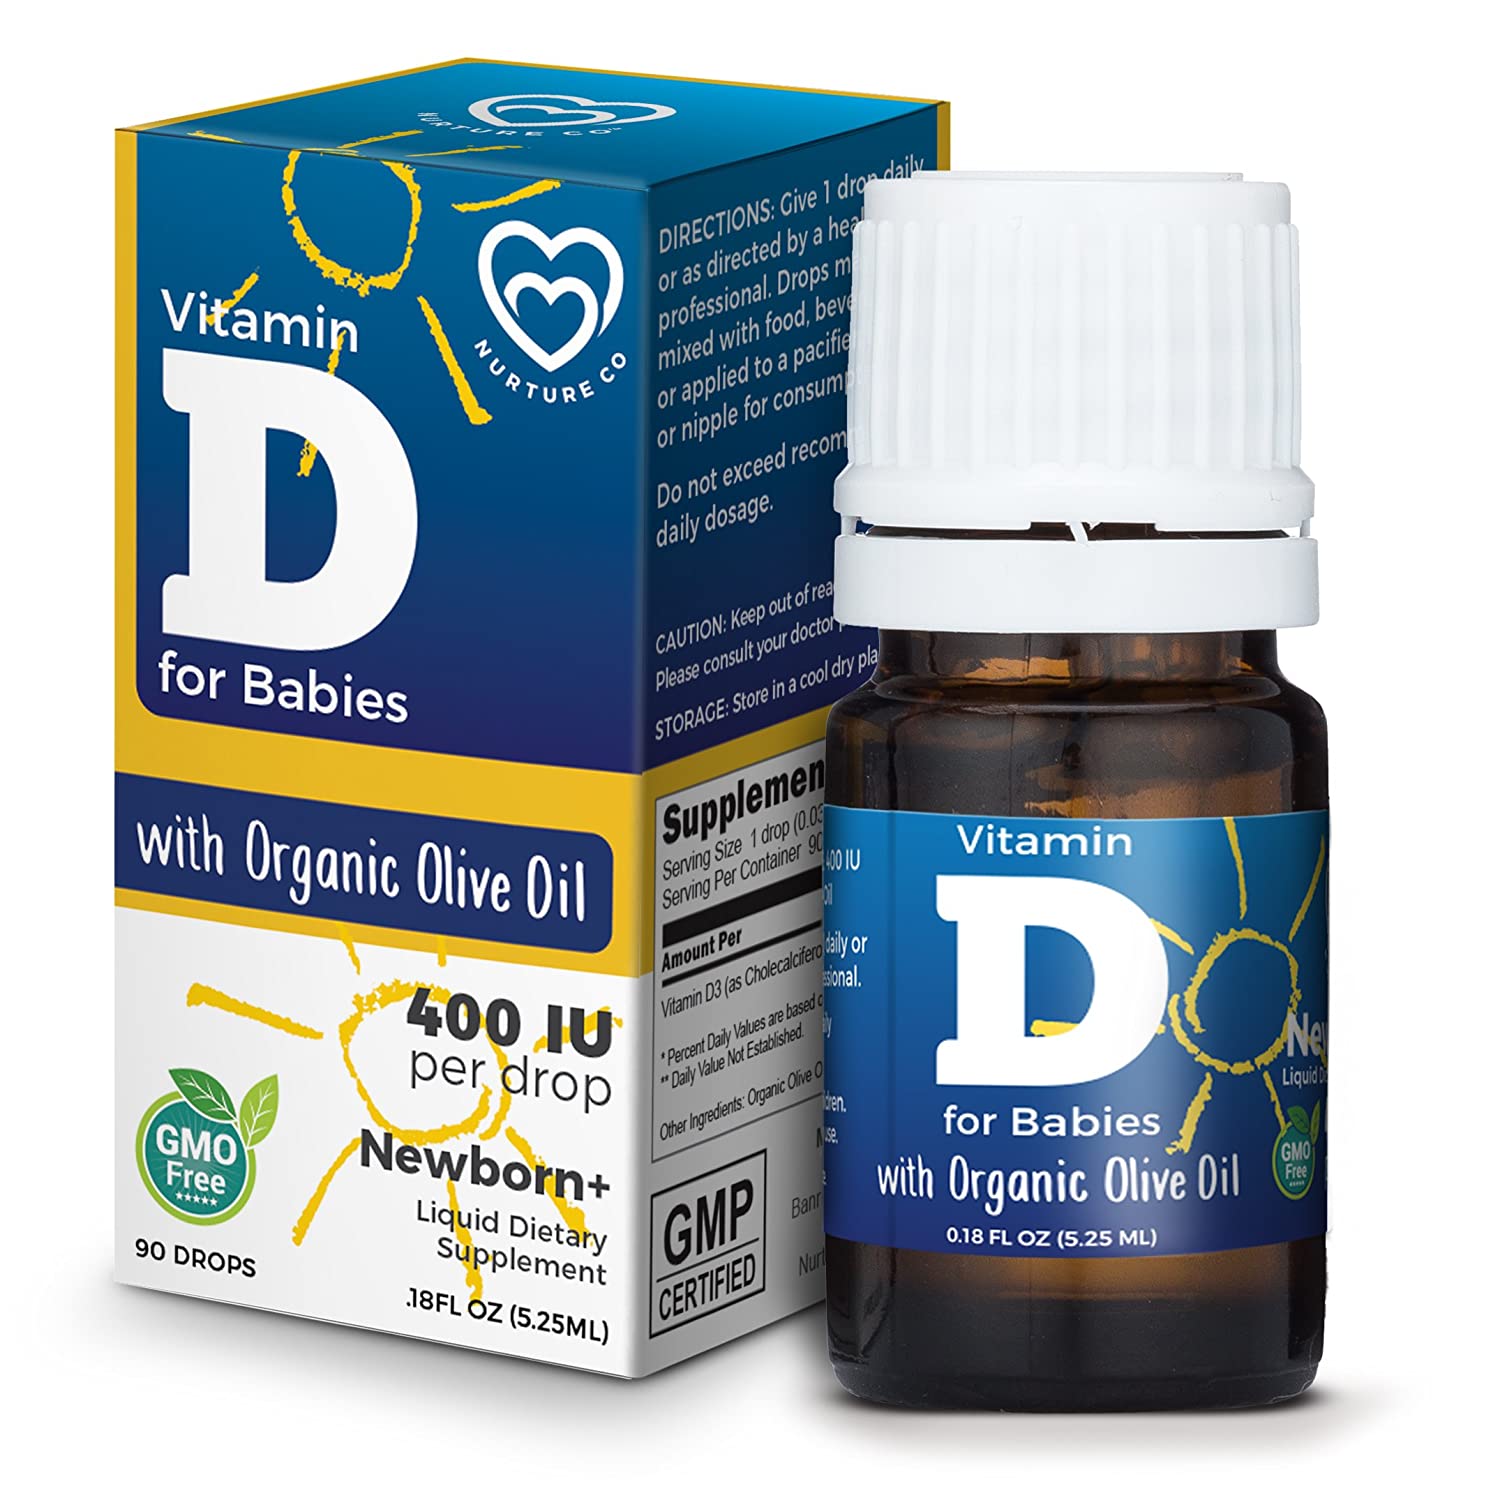 Nurture Co Vitamin D Drops for Infants - Baby Vitamin D Drops 400 IU - Non GMO D3 Supplement for Babies and Children with Organic Olive Oil - 150 Drops